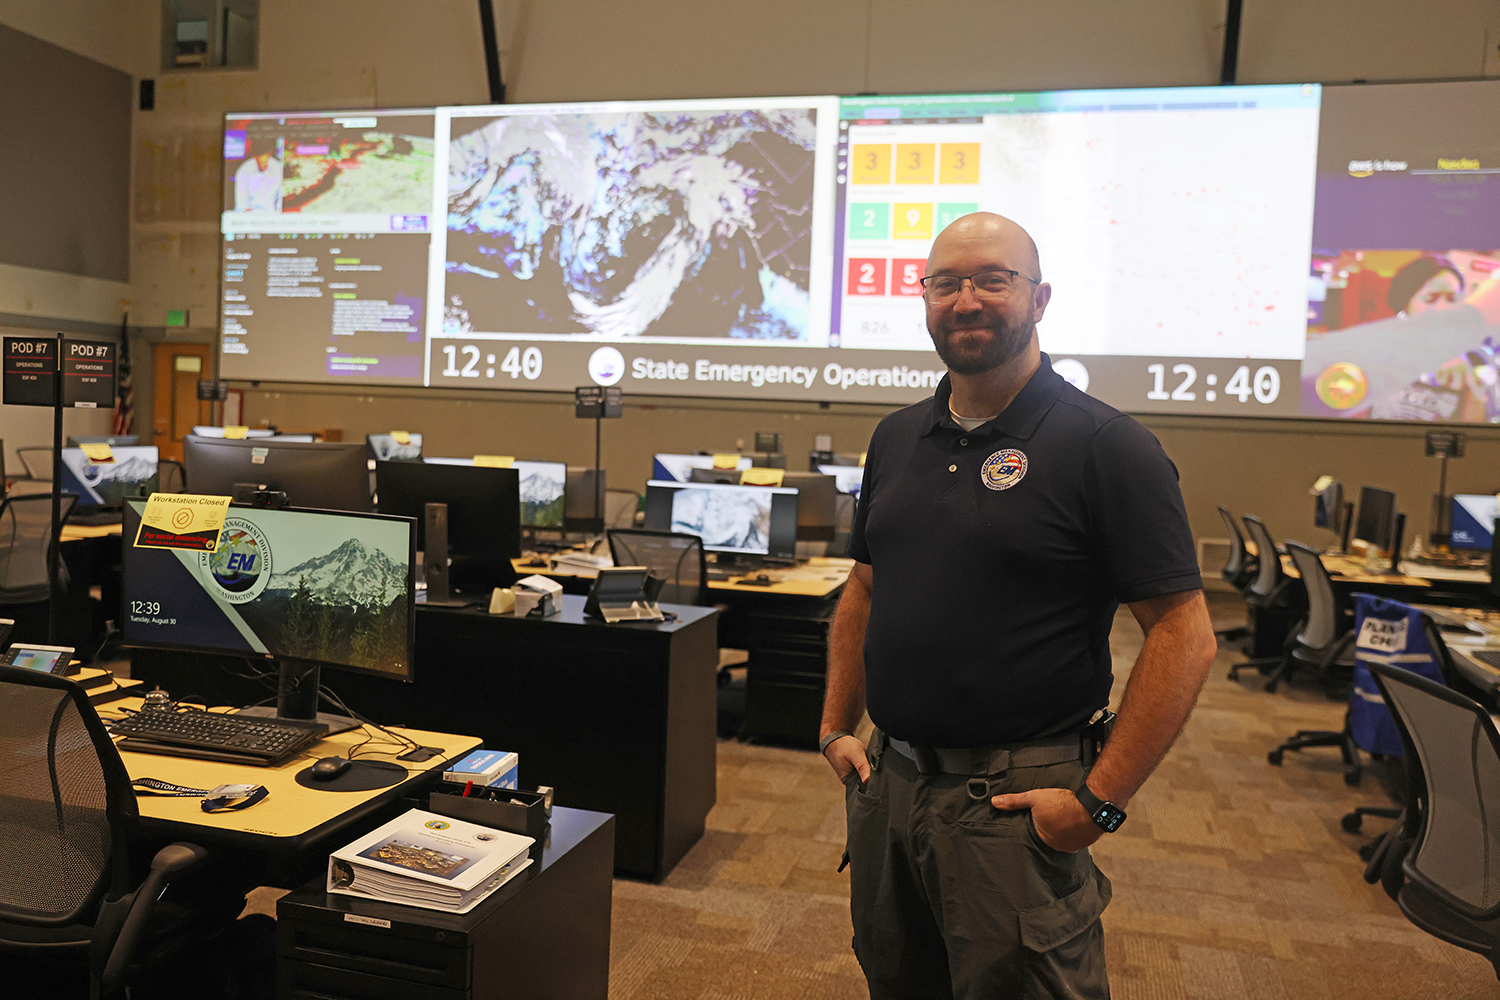 Big and small changes at State Emergency Operations Center